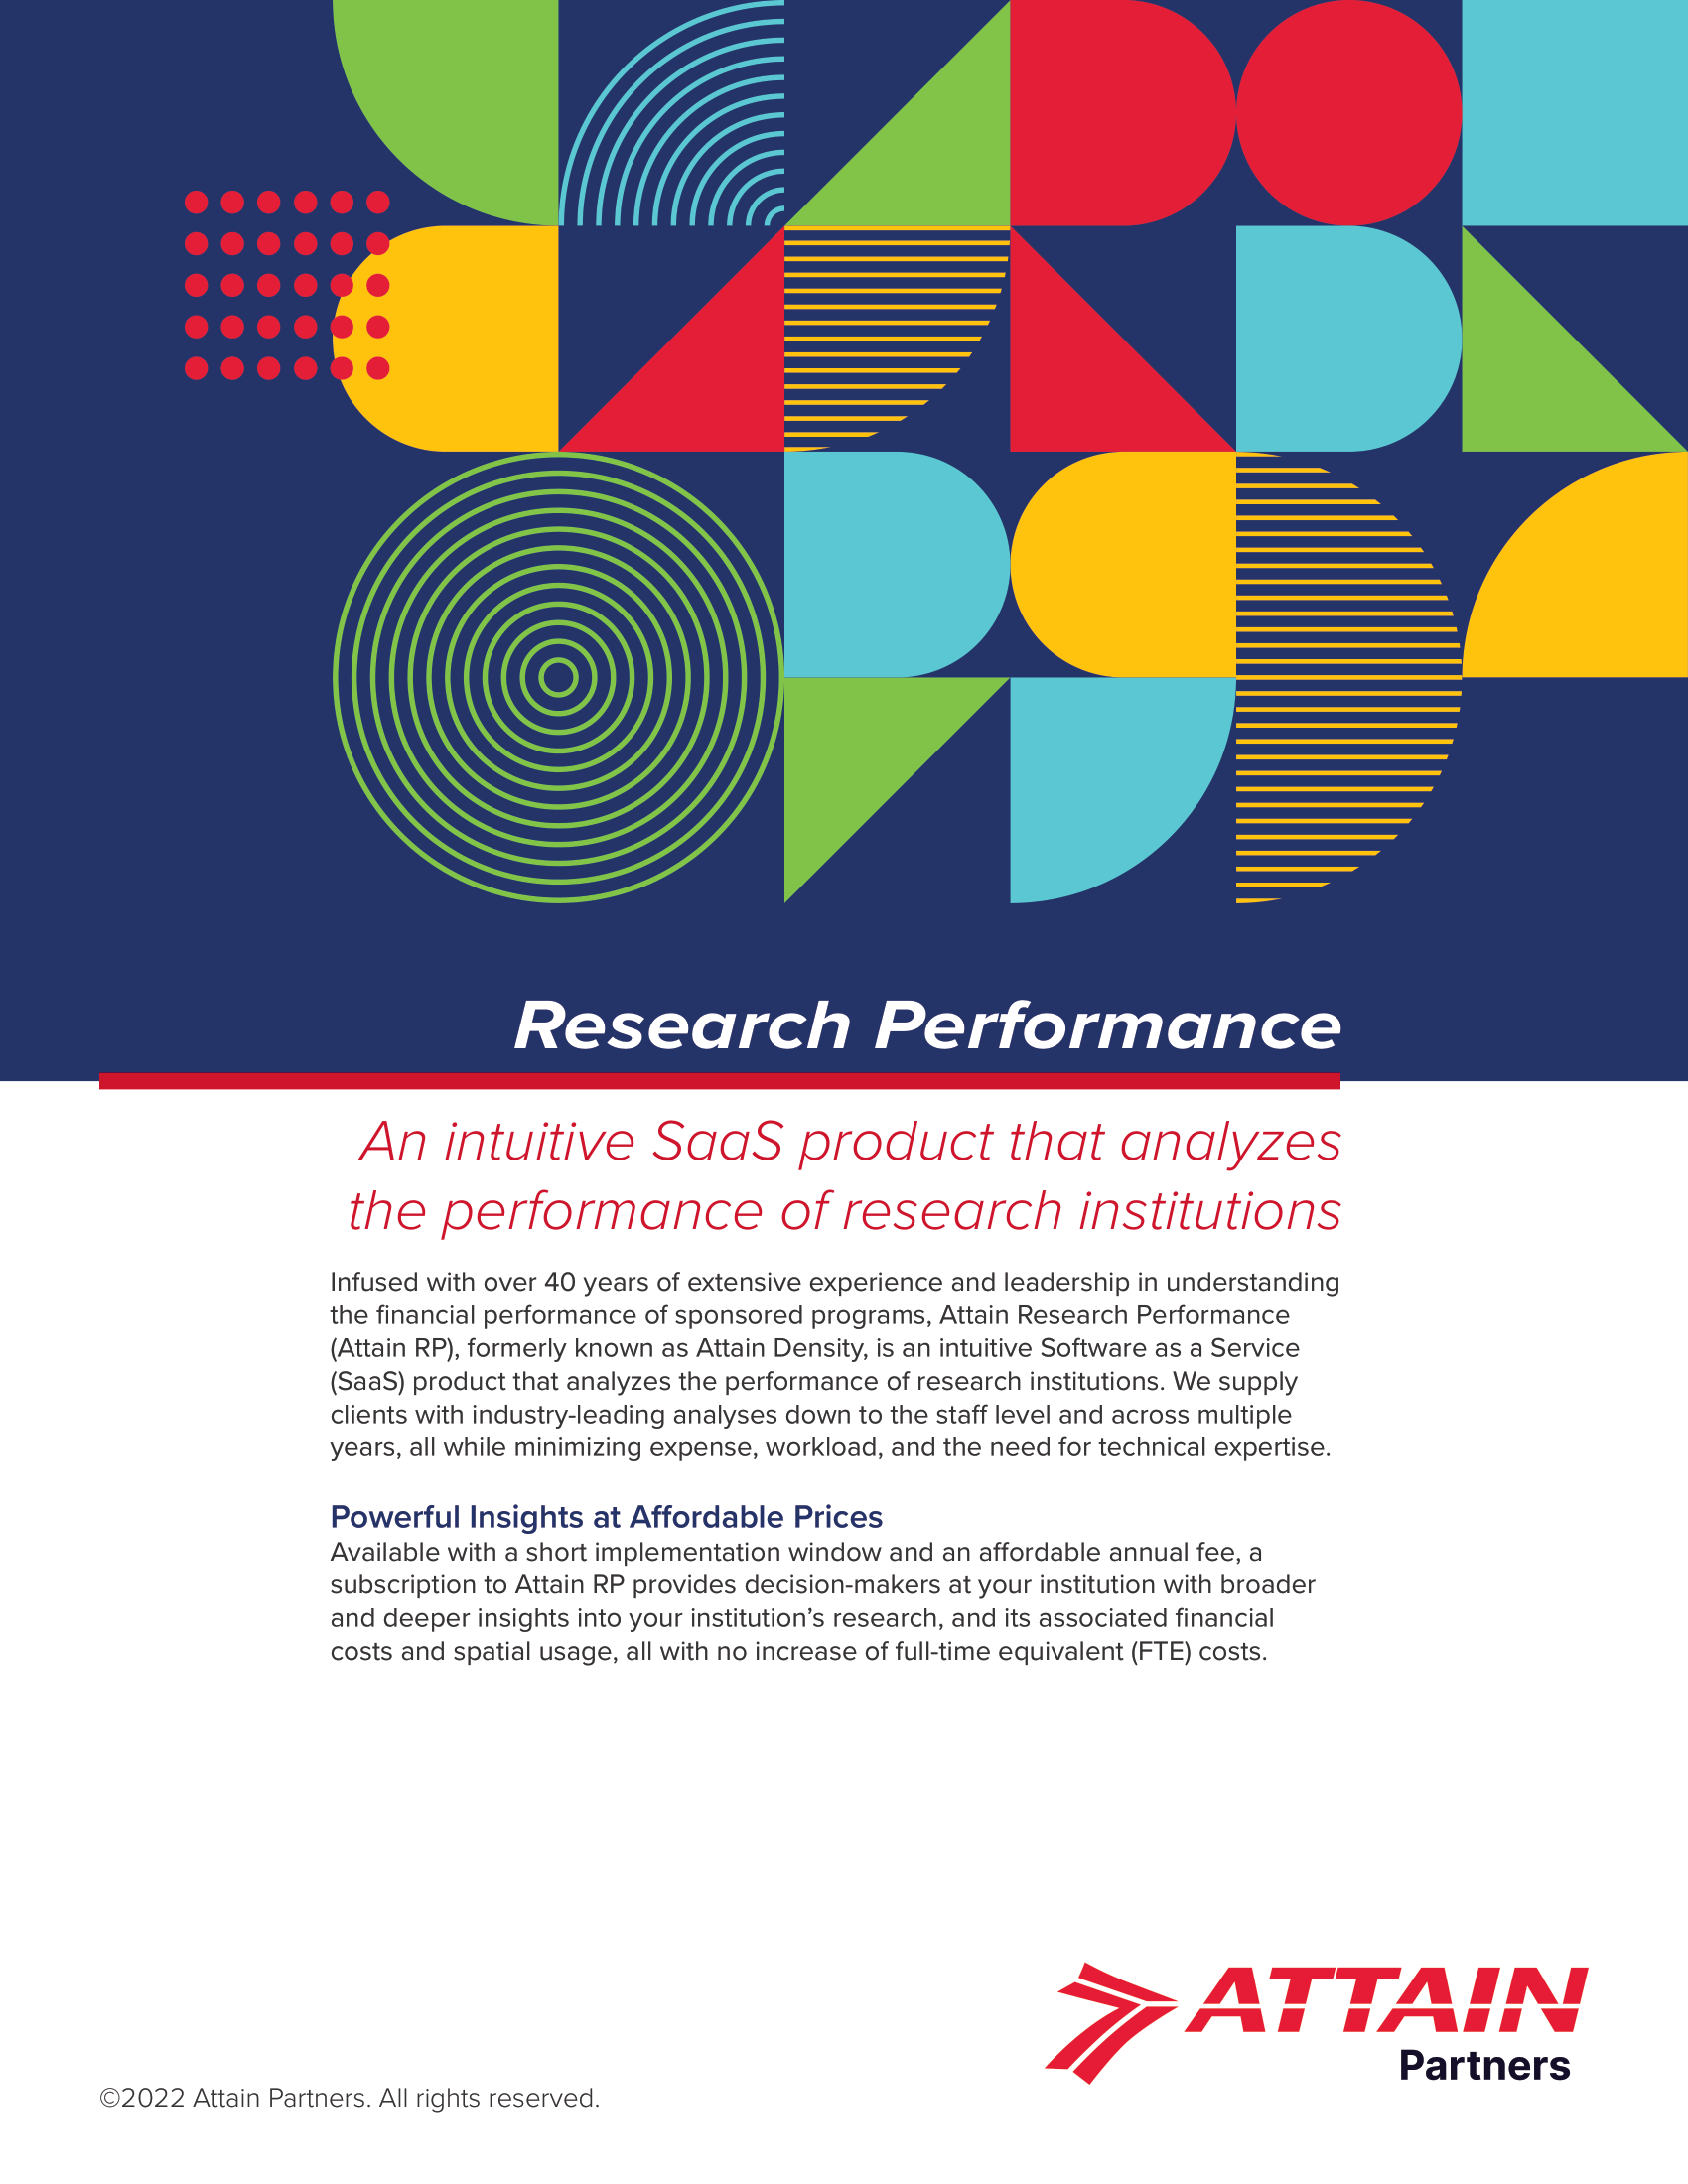 Attain Research Performance PDF cover